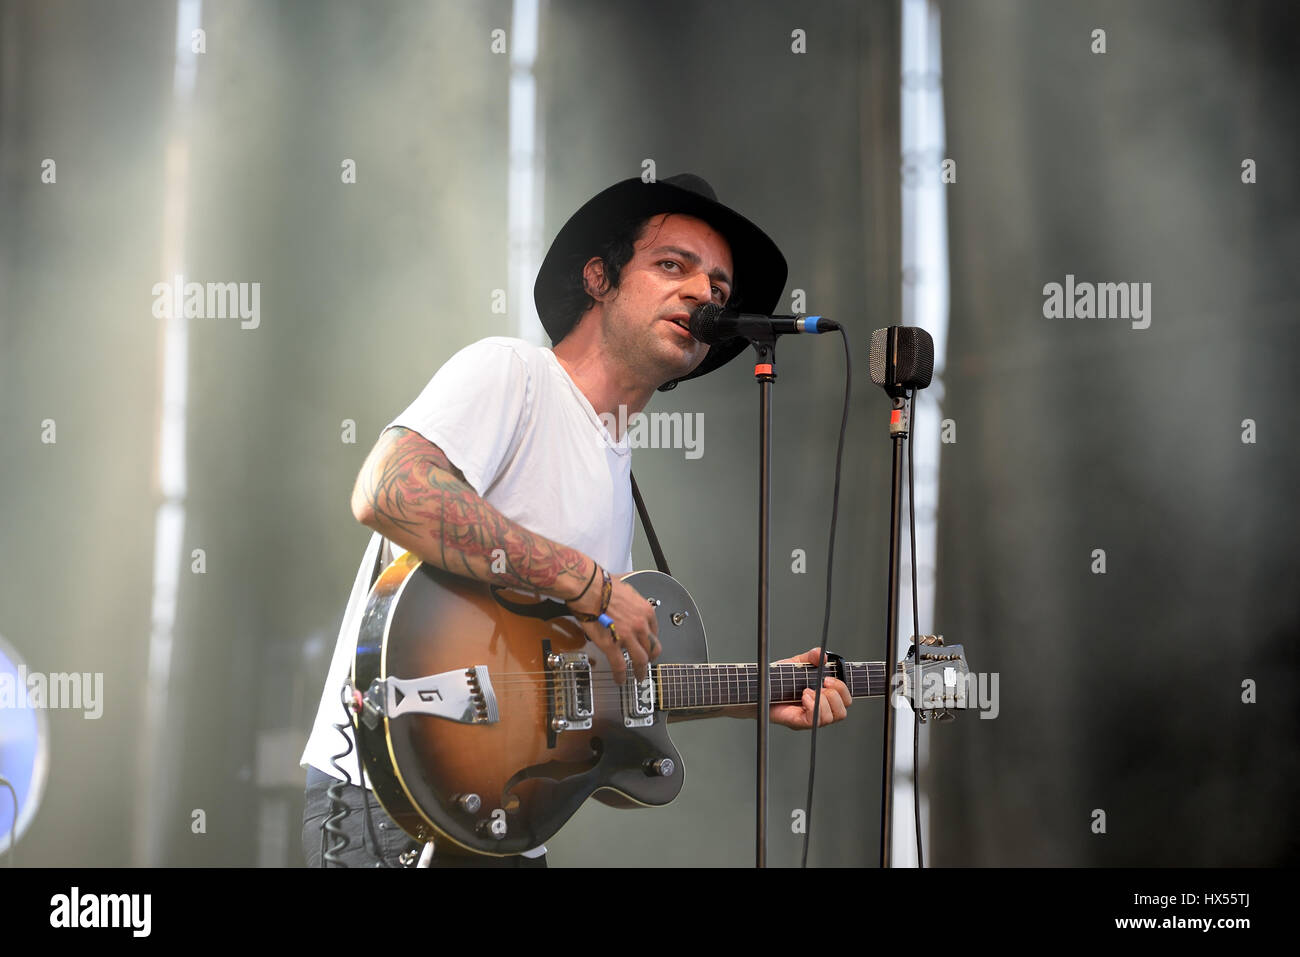 BENICASSIM, SPAIN - JUL 16: L.A. (Spanish band) in concert at FIB Festival on July 16, 2015 in Benicassim, Spain. Stock Photo